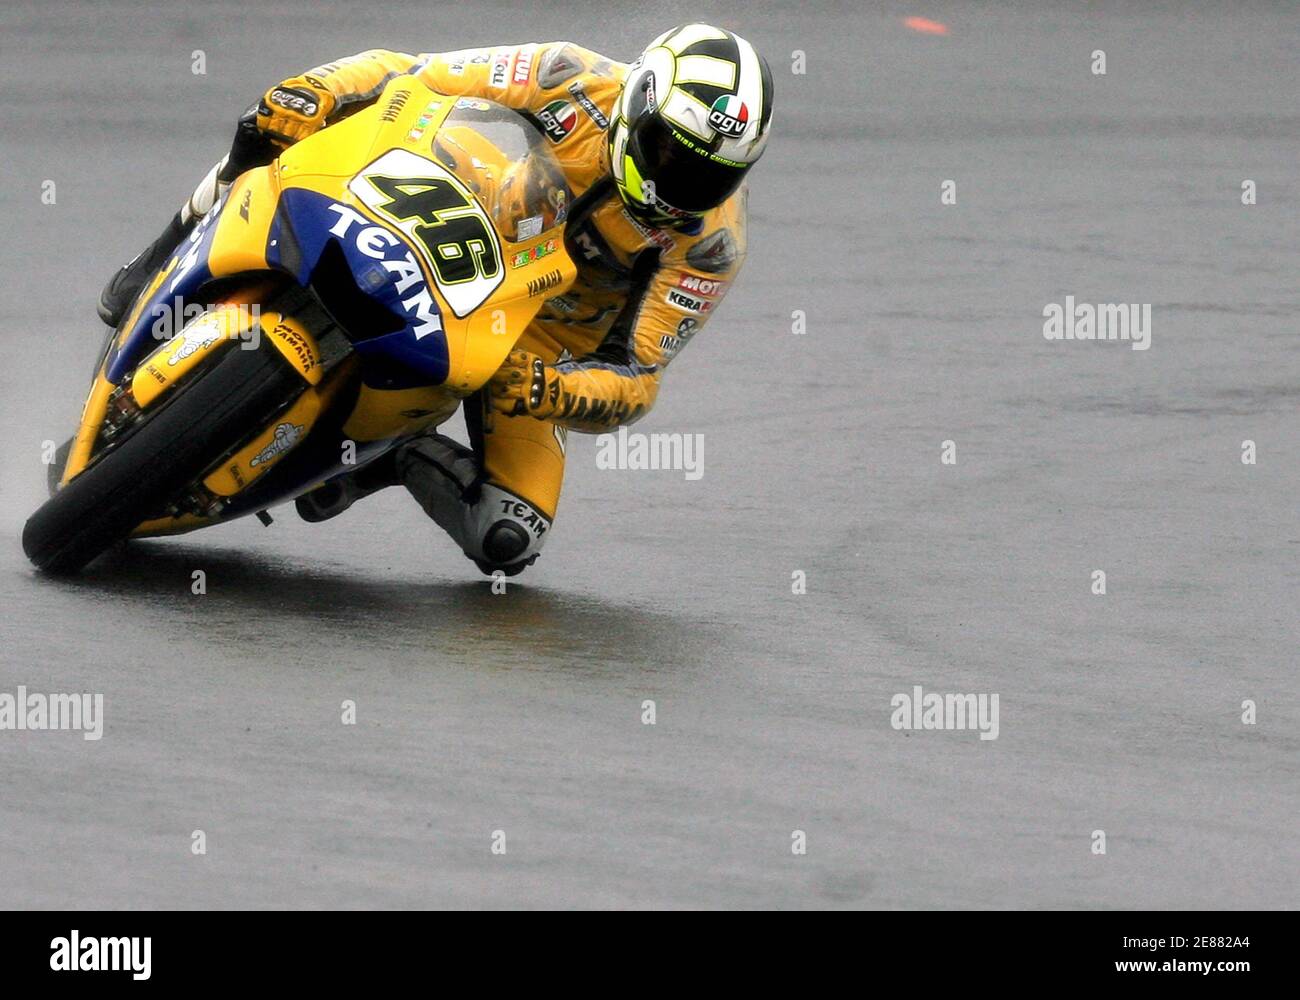 World Champion Italian rider Valentino Rossi of Camel Yamaha rides during a  qualifying session at Istanbul Park, venue of MotoGP Grand Prix of Turkey,  in Istanbul April 29, 2006. Australian Chris Vermeulen